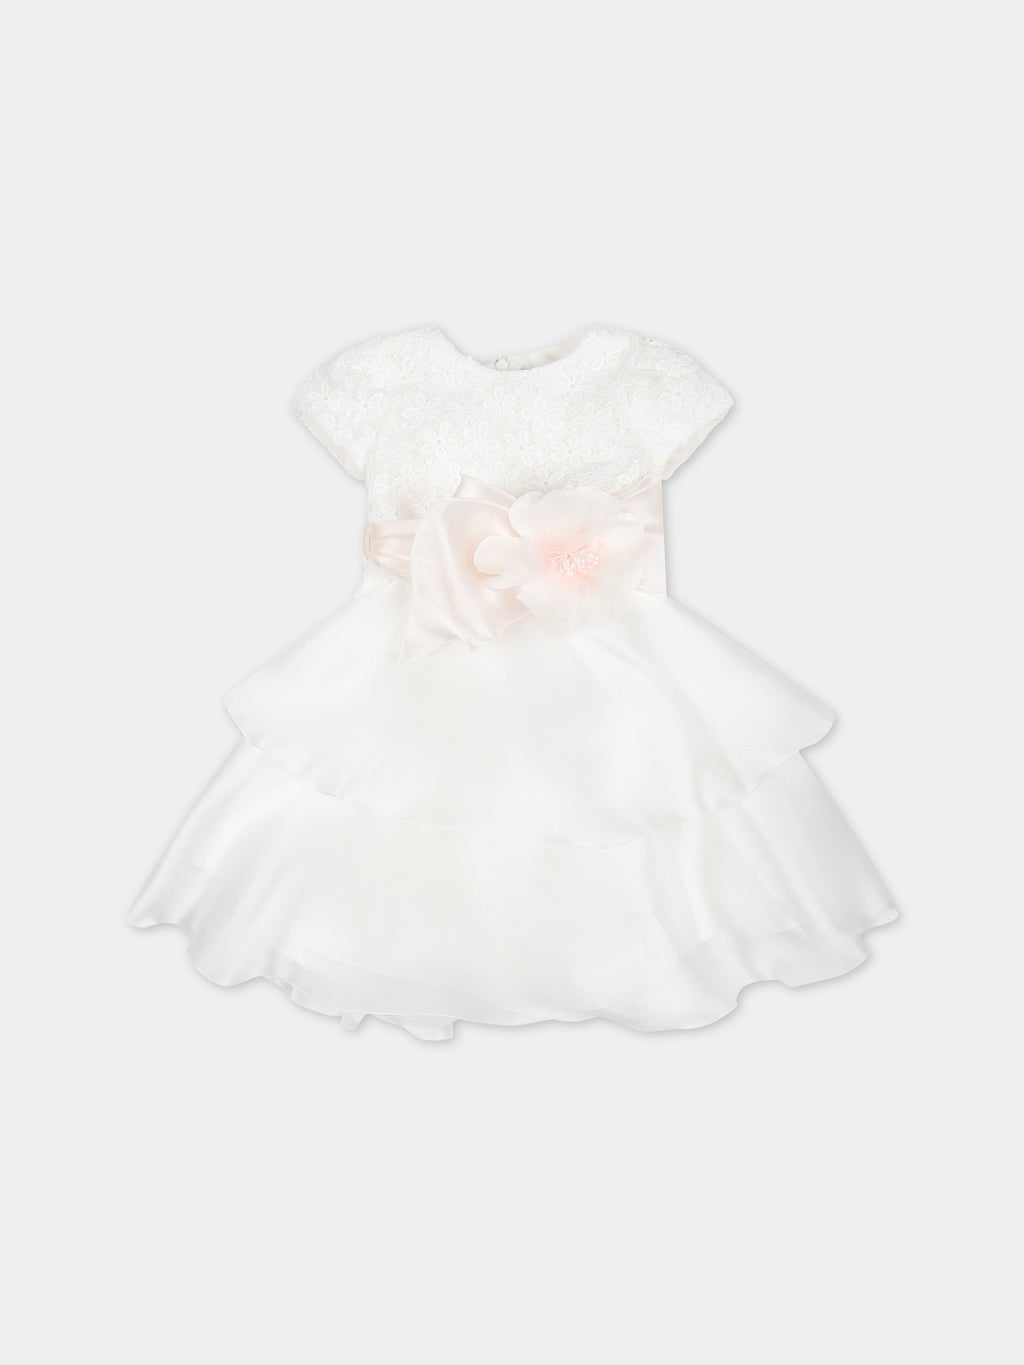 White dress for baby girl with flower